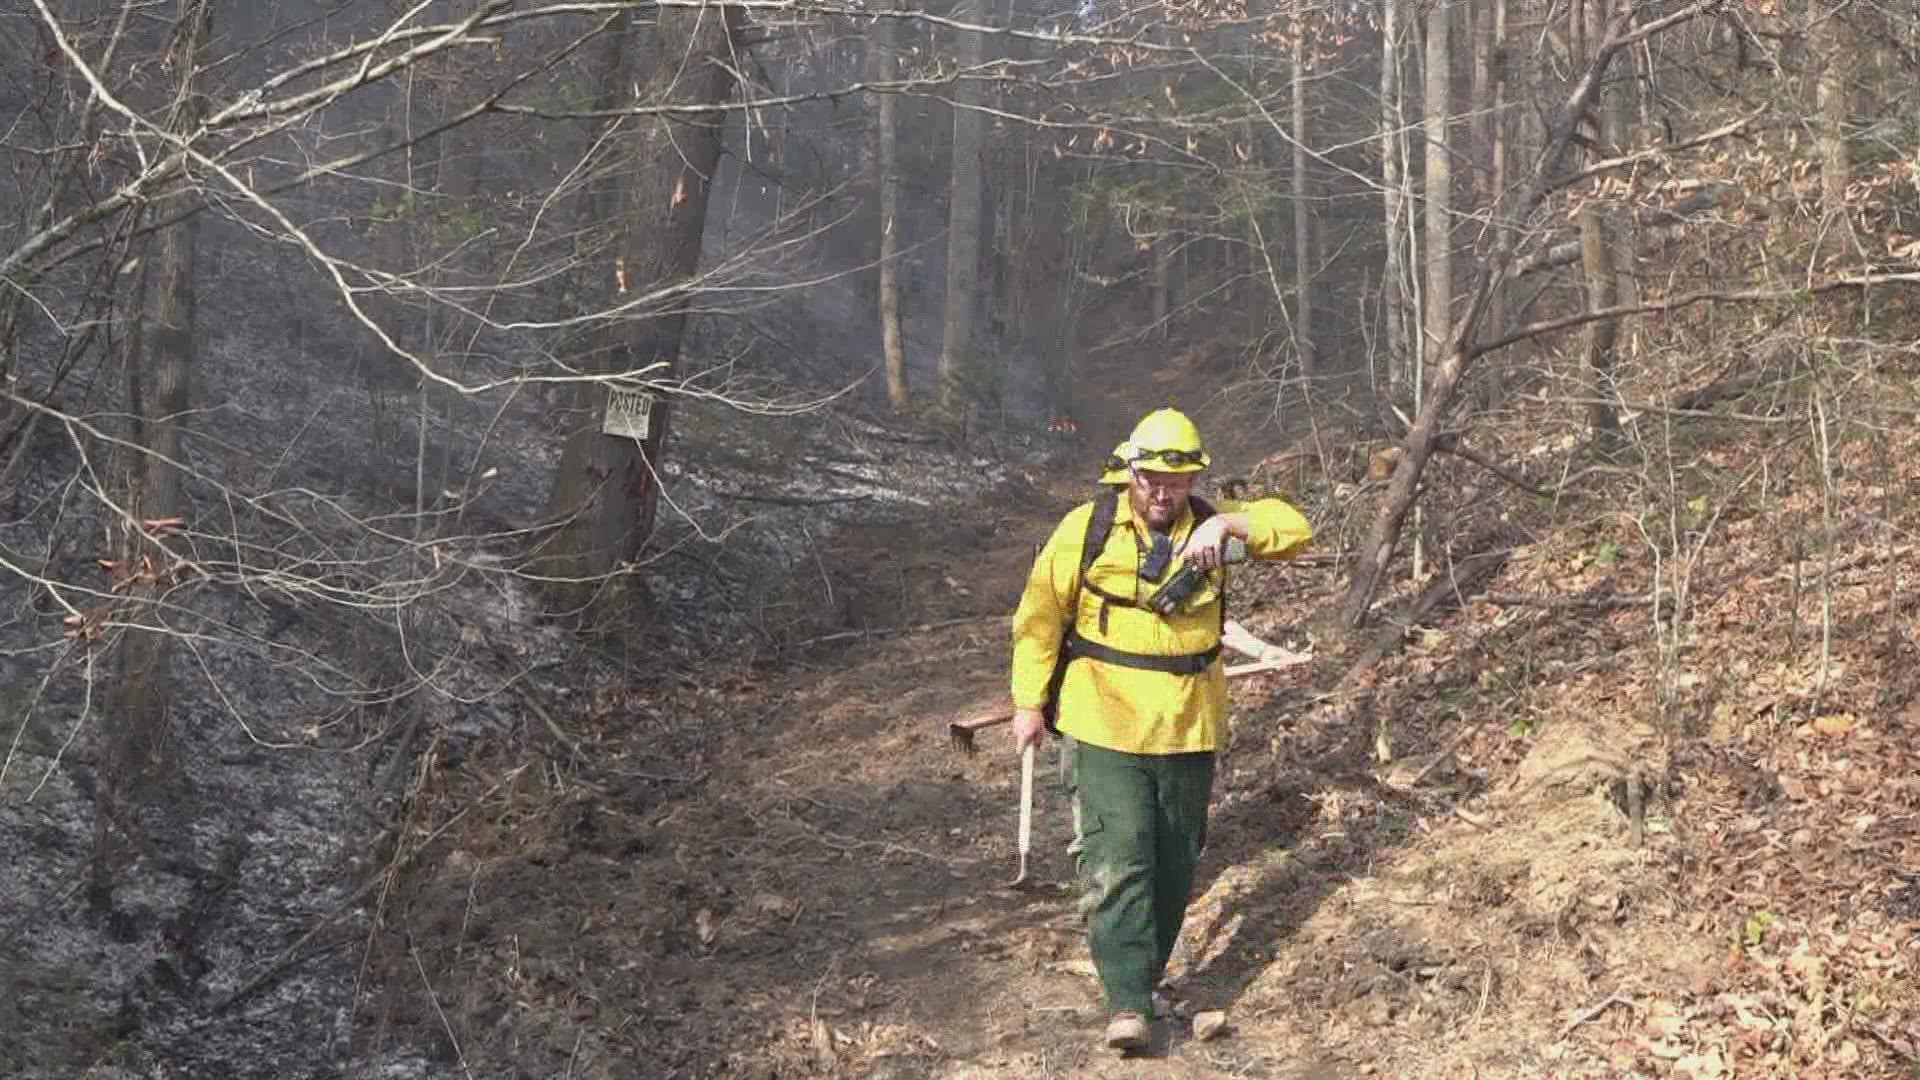 In East Tennessee, about half a dozen fires have kept the Tennessee Division of Forestry team busy.